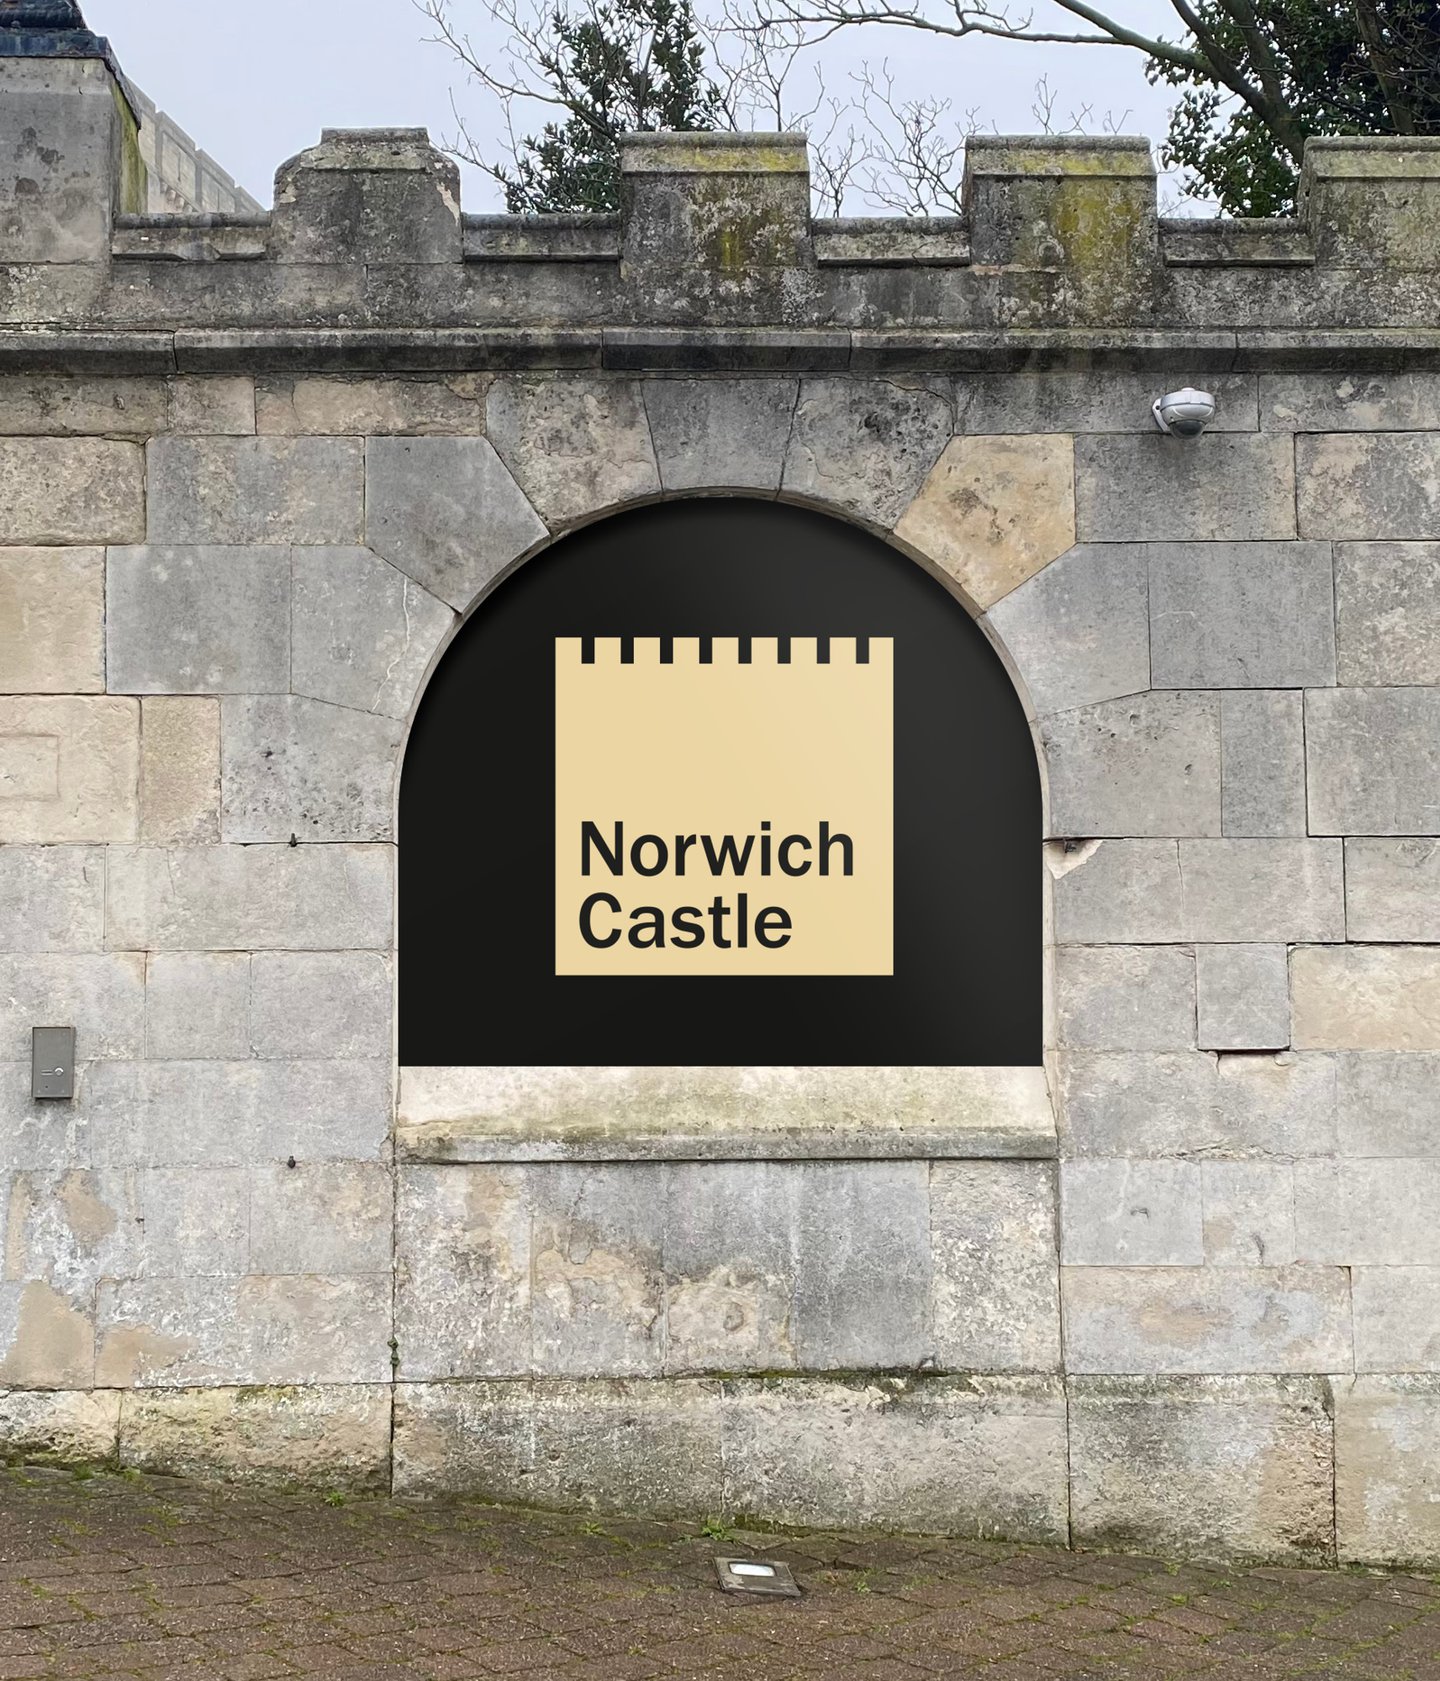 A rebrand for Norwich Castle is inspired by Post-it drawings from the public